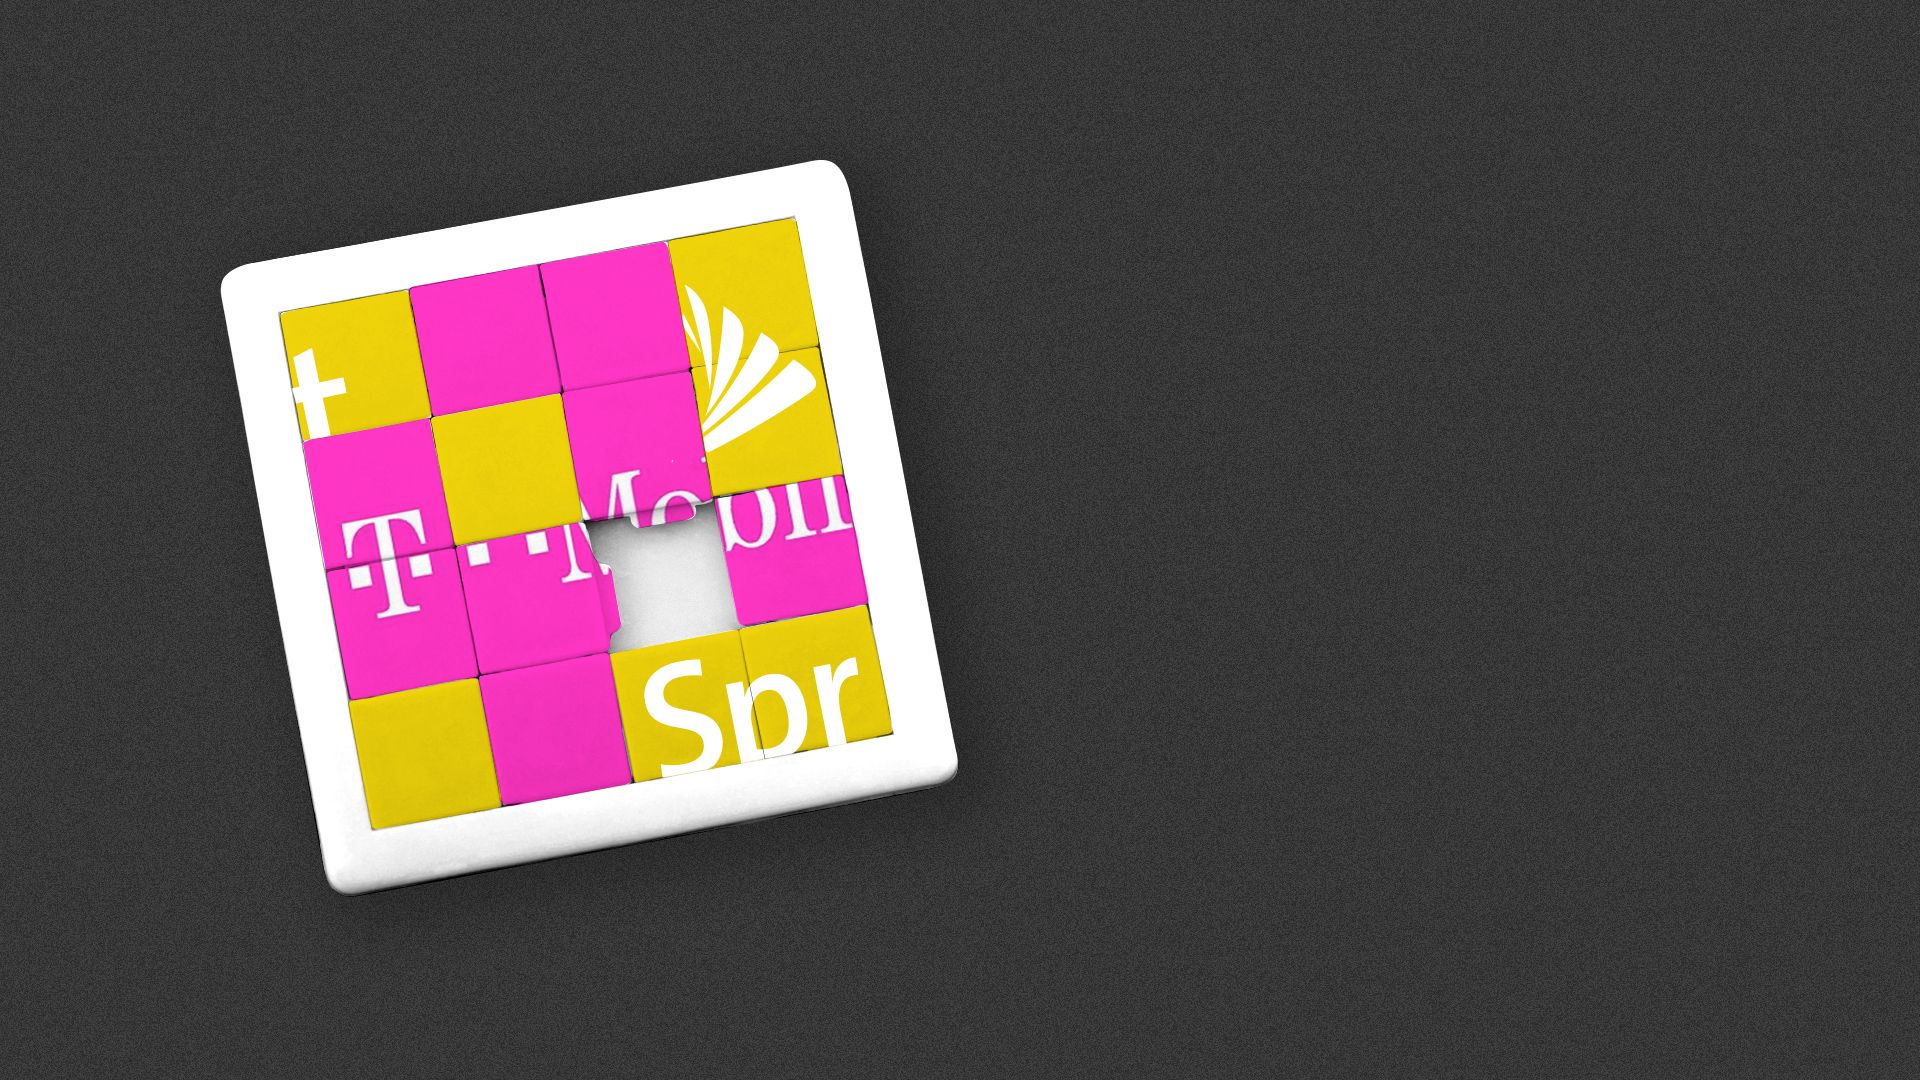 Illustration of a slide puzzle with the TMobile and Spring logos all jumbled up.